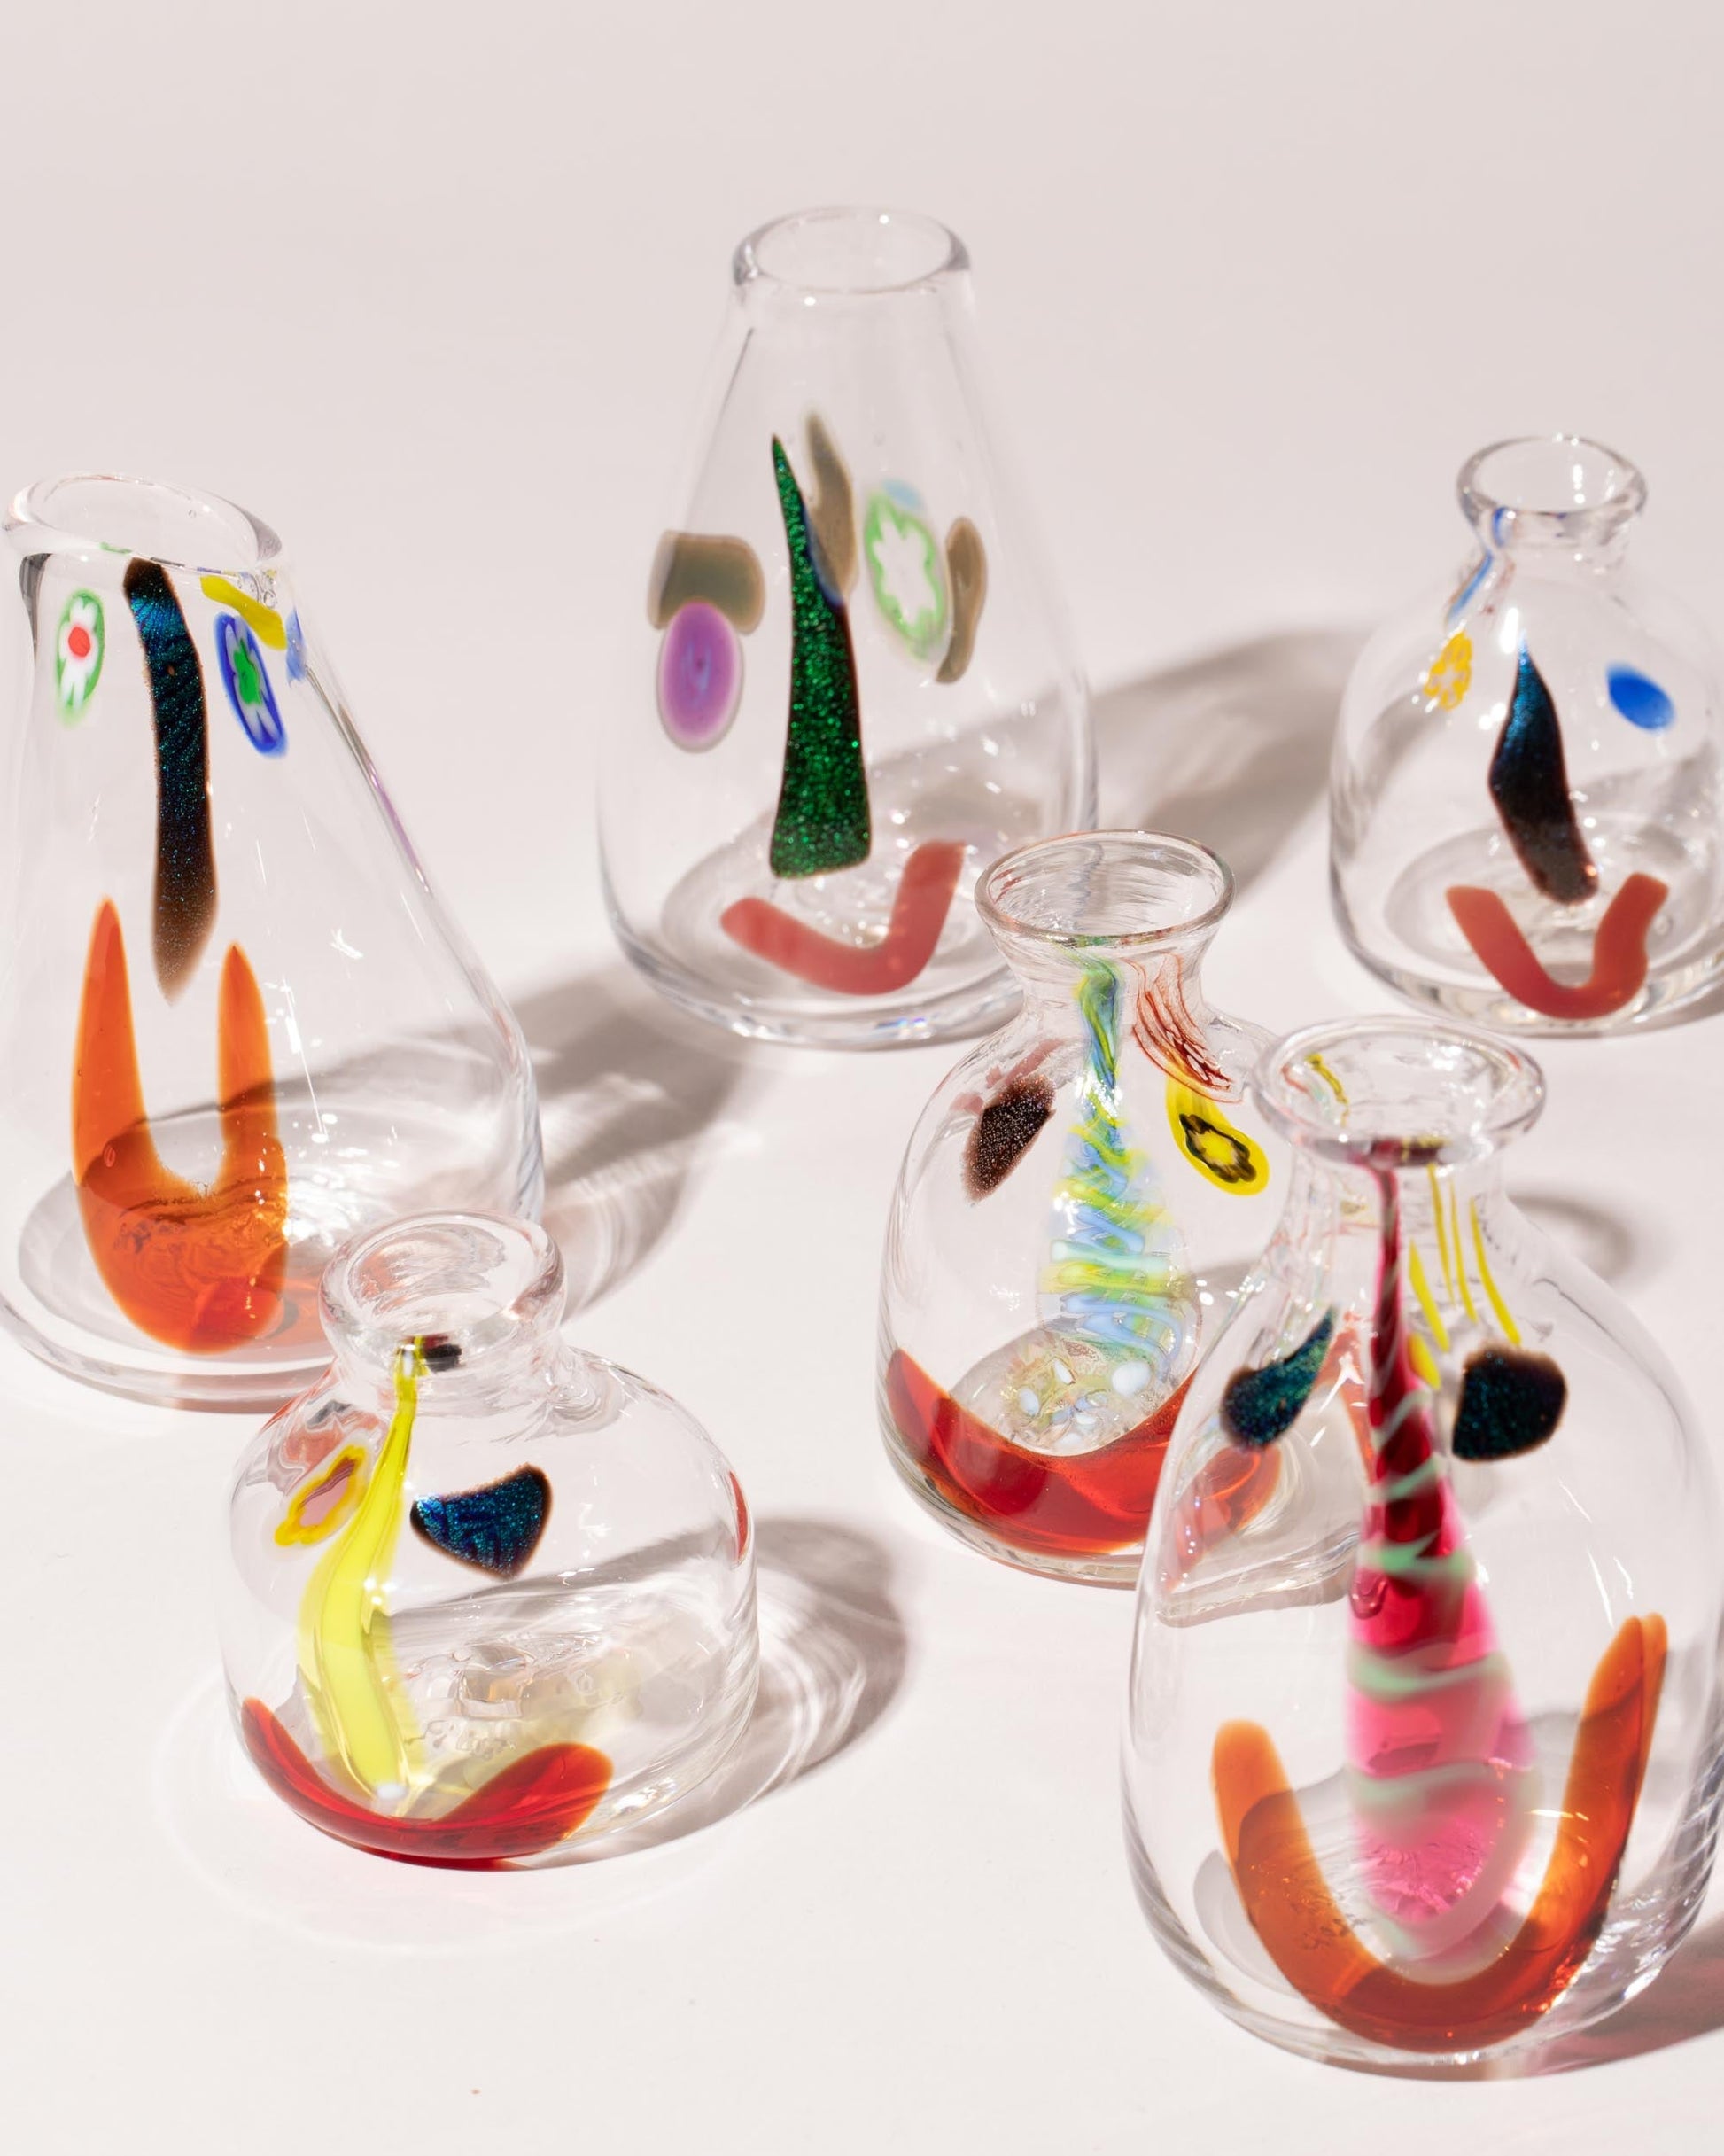 Group of FACEVESSEL Bud Vases on light color background.